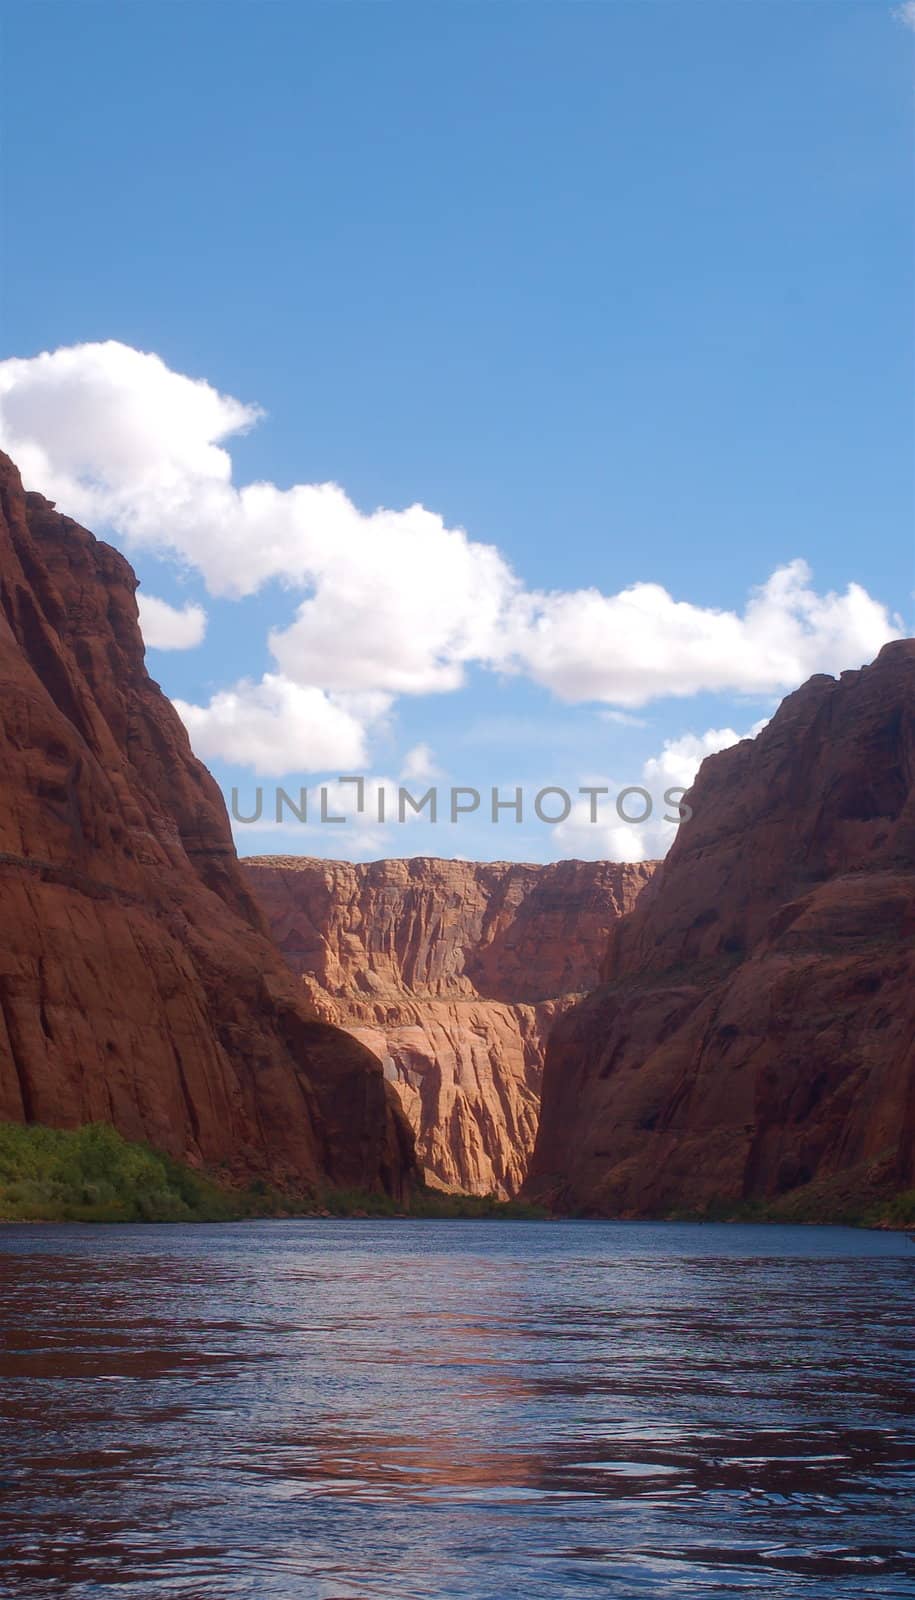 View from the Colorado River, looking up at the red rock walls of the Grand Canyon into a blue cloudy sky.